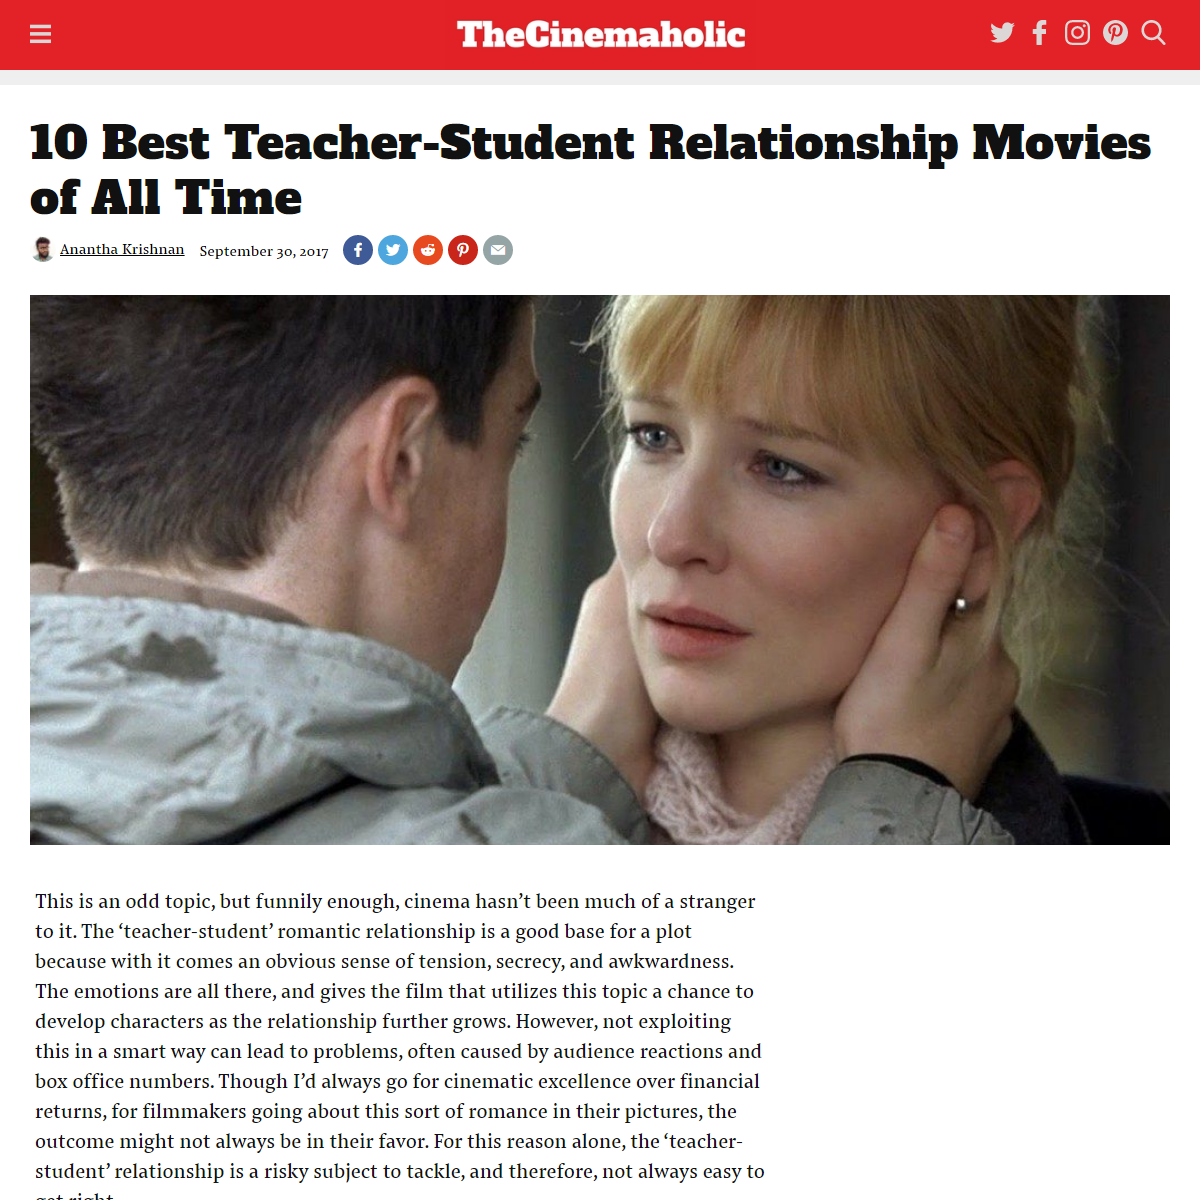 A complete backup of https://thecinemaholic.com/10-best-movies-teacher-student-romantic-relationship/